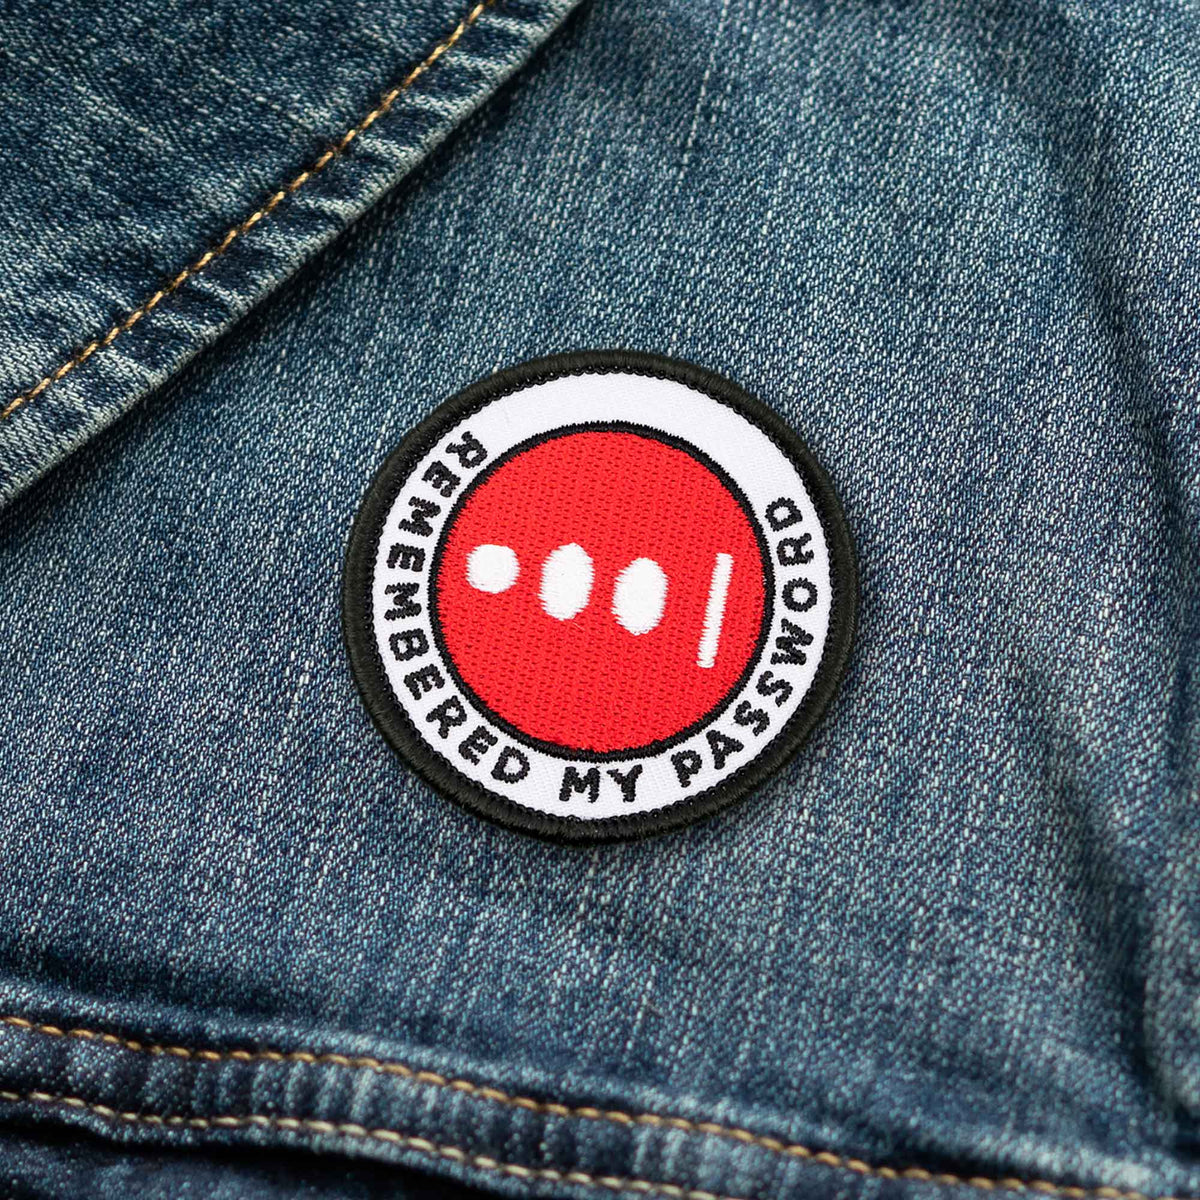 Remembered My PasswordResponded To Emails adulting merit badge patch for adults on denim jacket